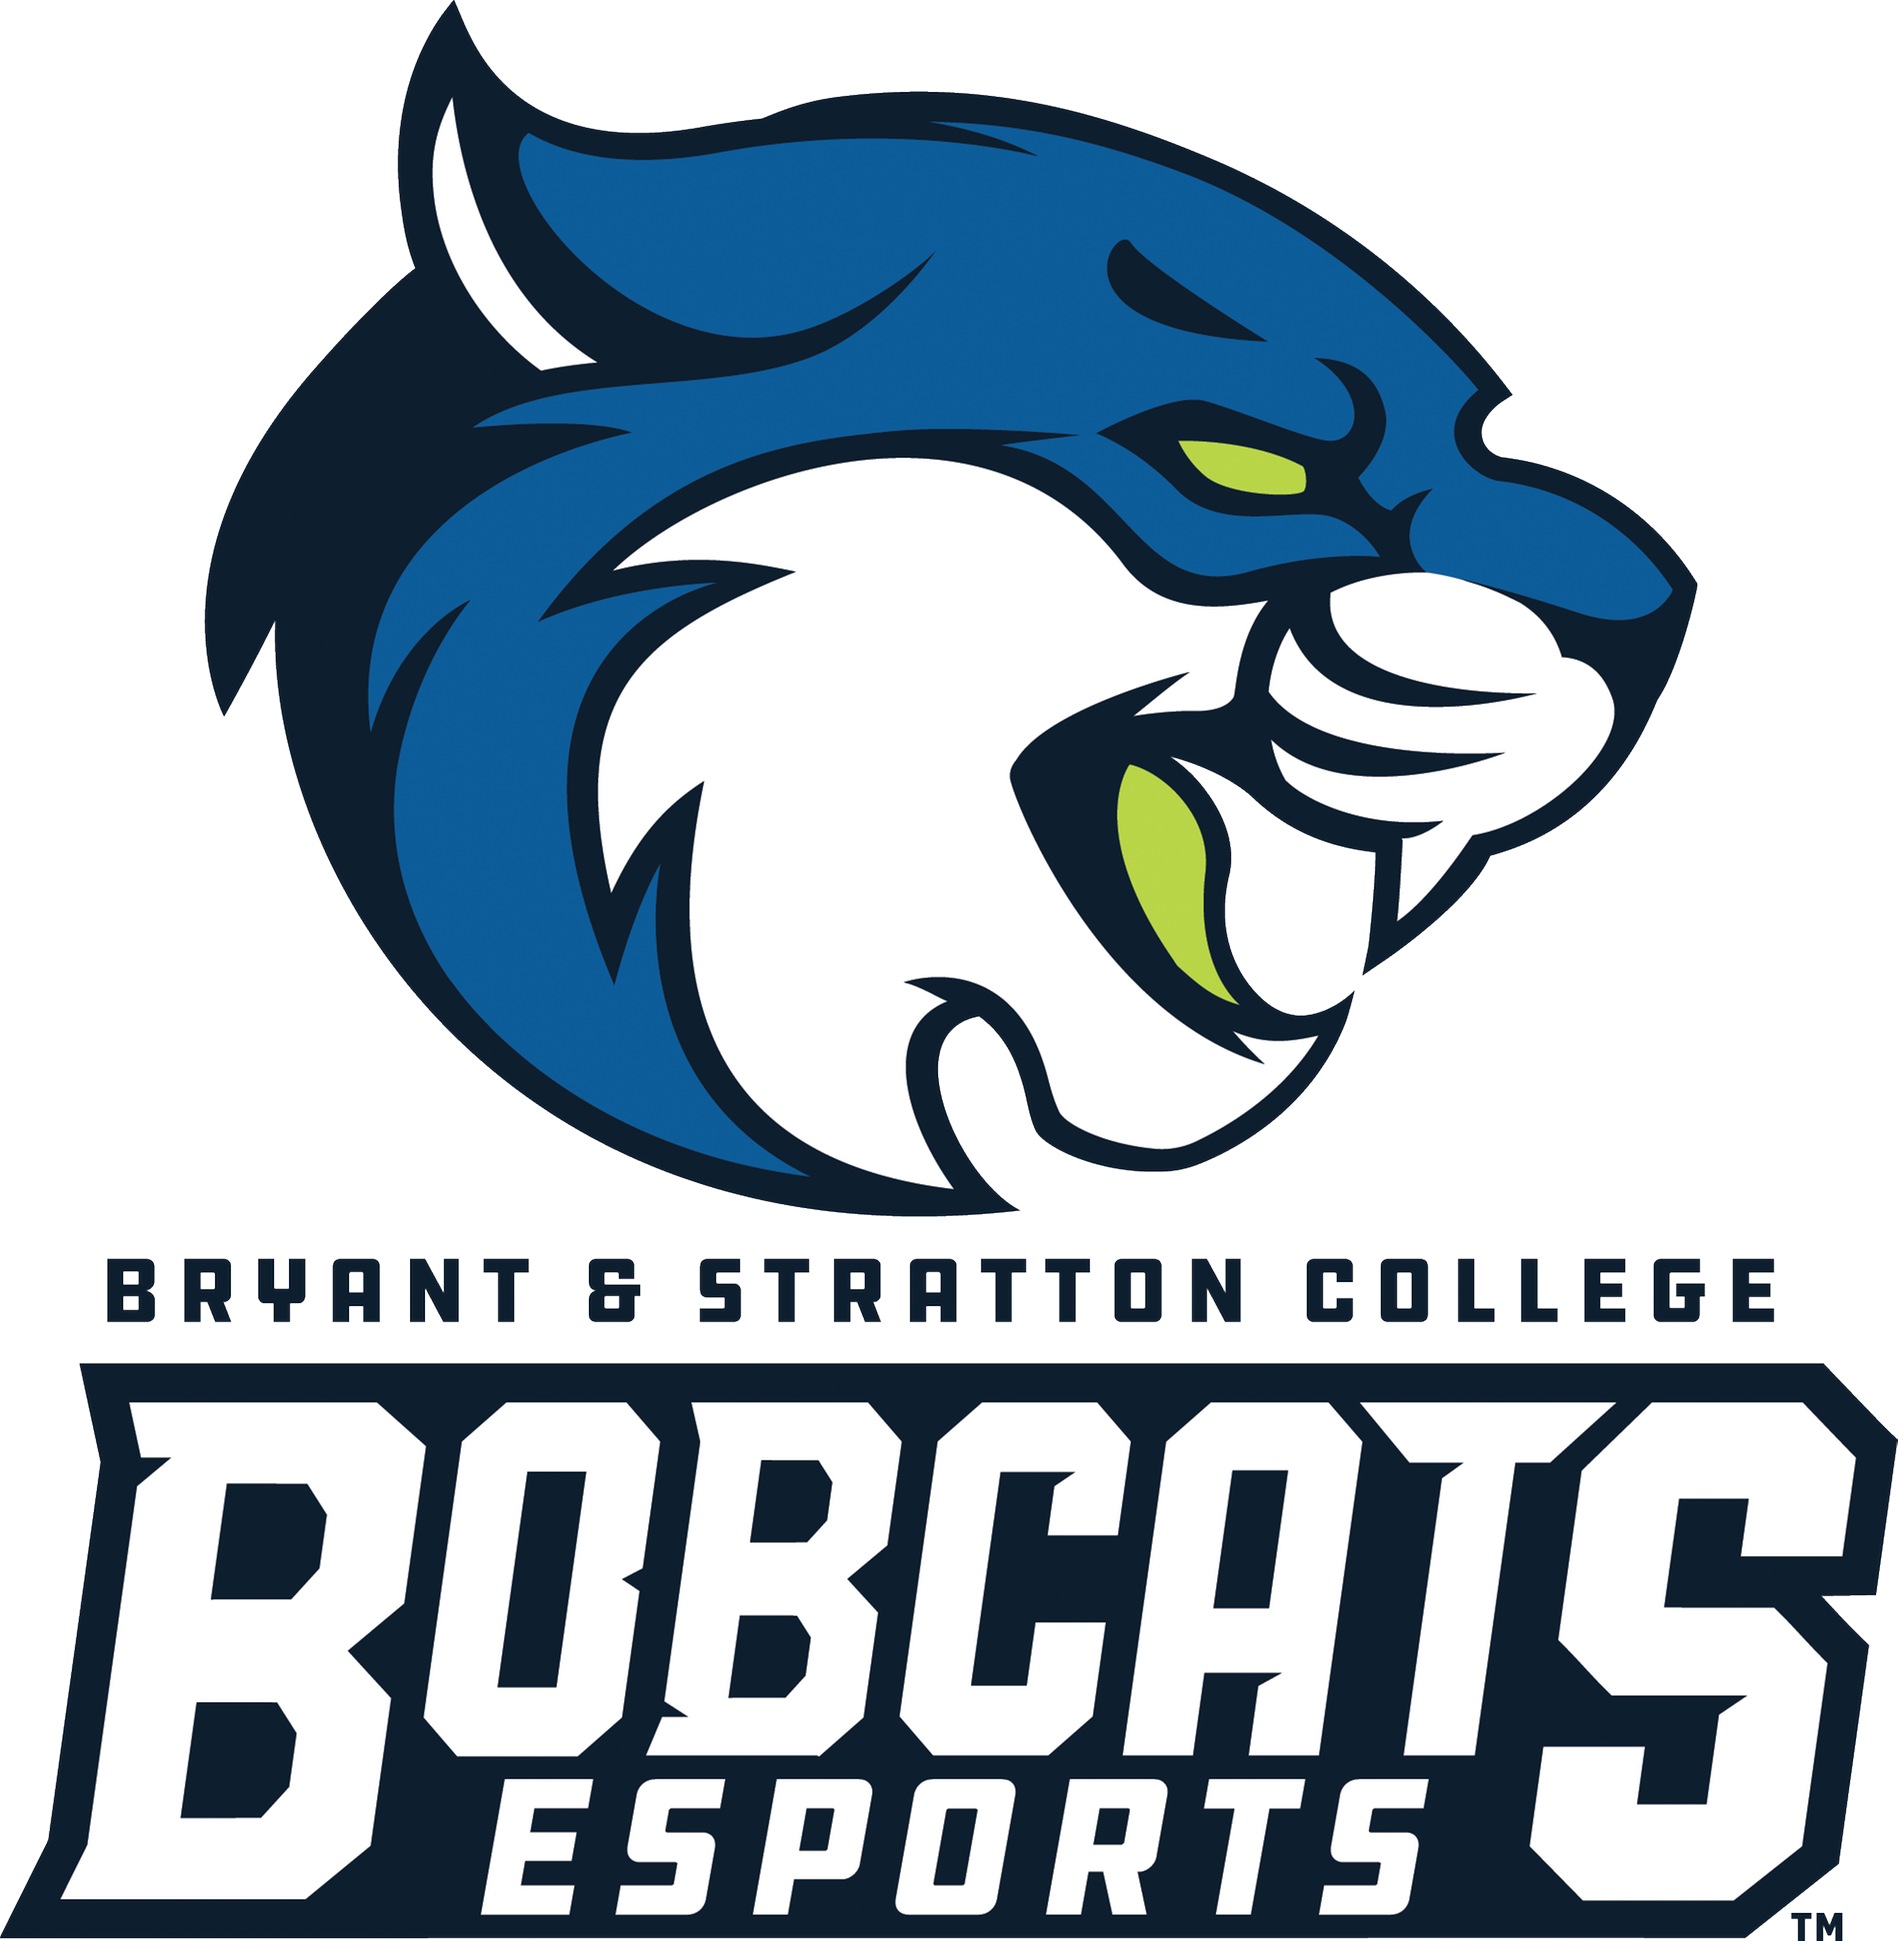 BSC Wisconsin Esports Team wins a National Championship